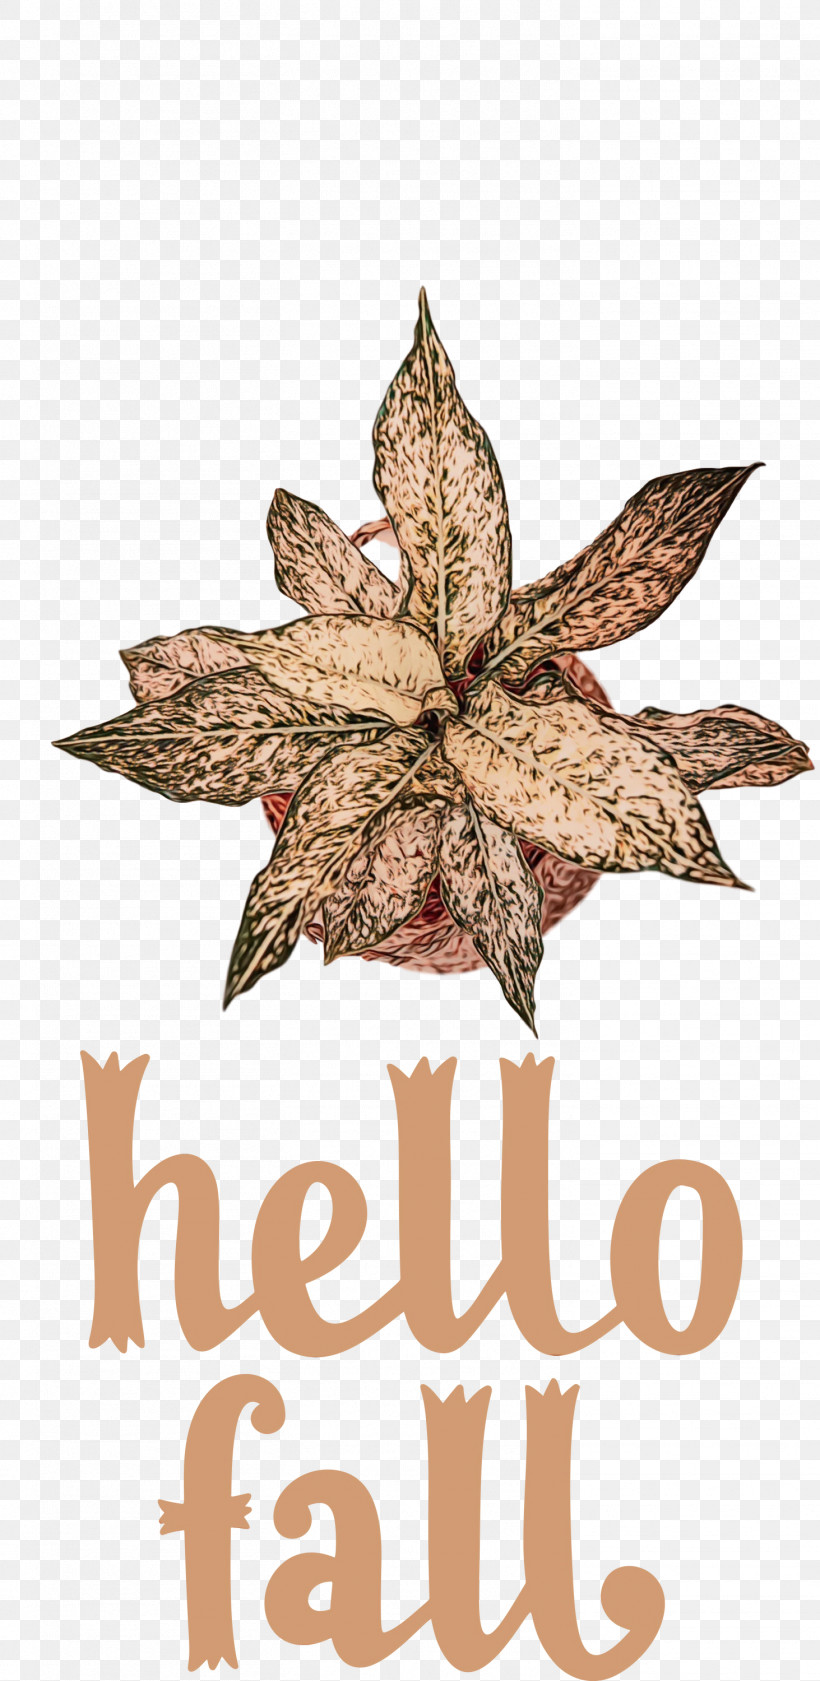 Hello Fall Autumn Cdr Drawing 2020, PNG, 1463x3000px, Hello Fall, Autumn, Cartoon, Cdr, Drawing Download Free